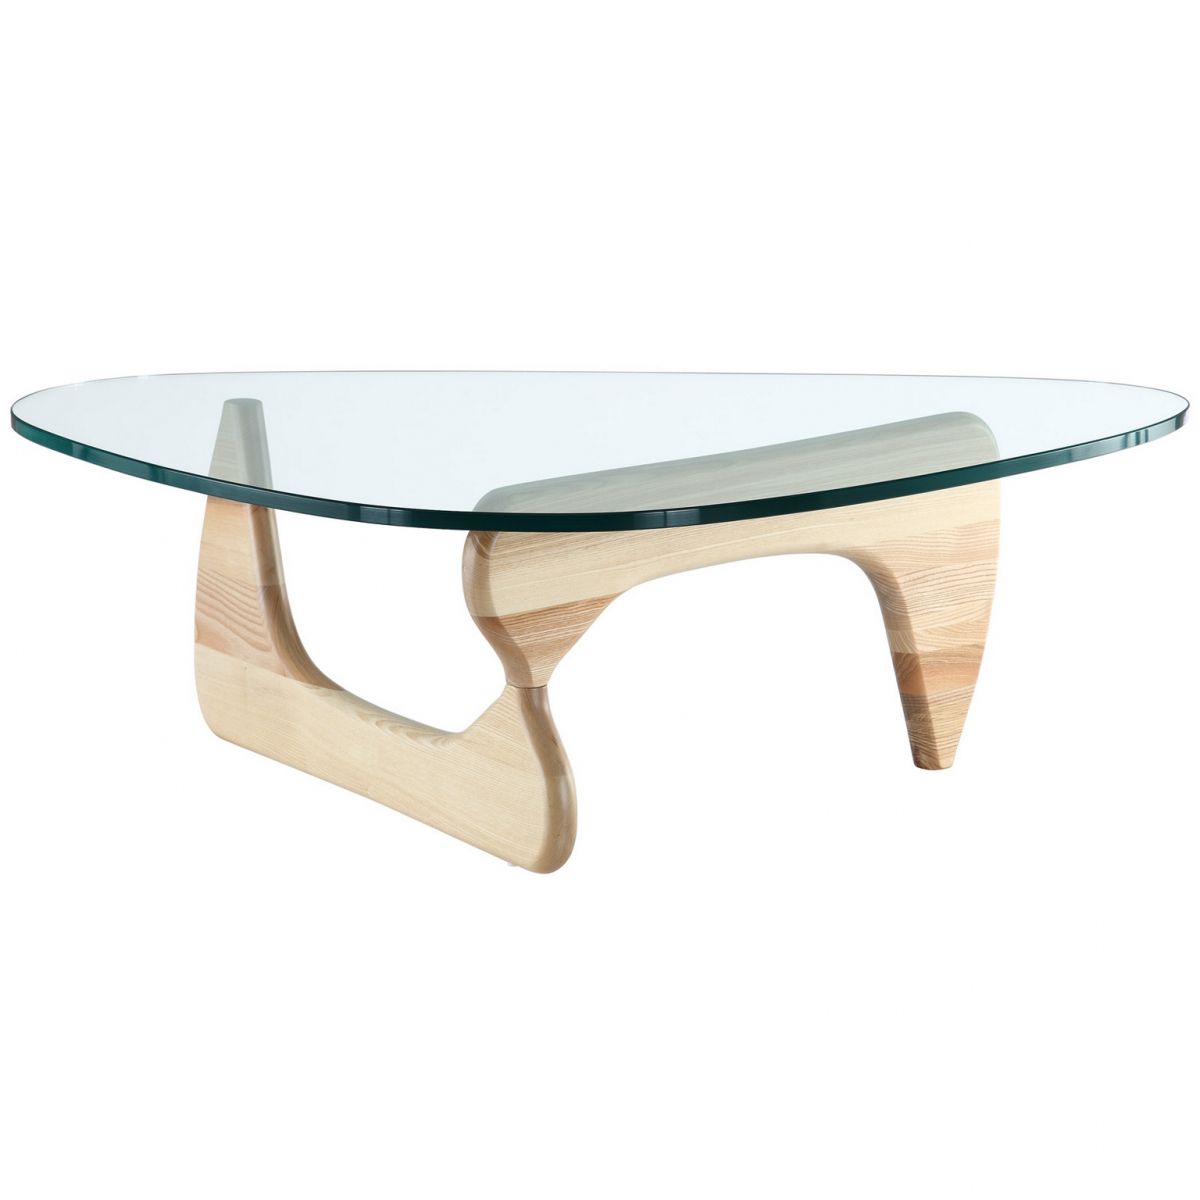 2020 White Triangular Coffee Tables Inside Triangle Coffee Table With Natural Wood Base (Gallery 9 of 20)